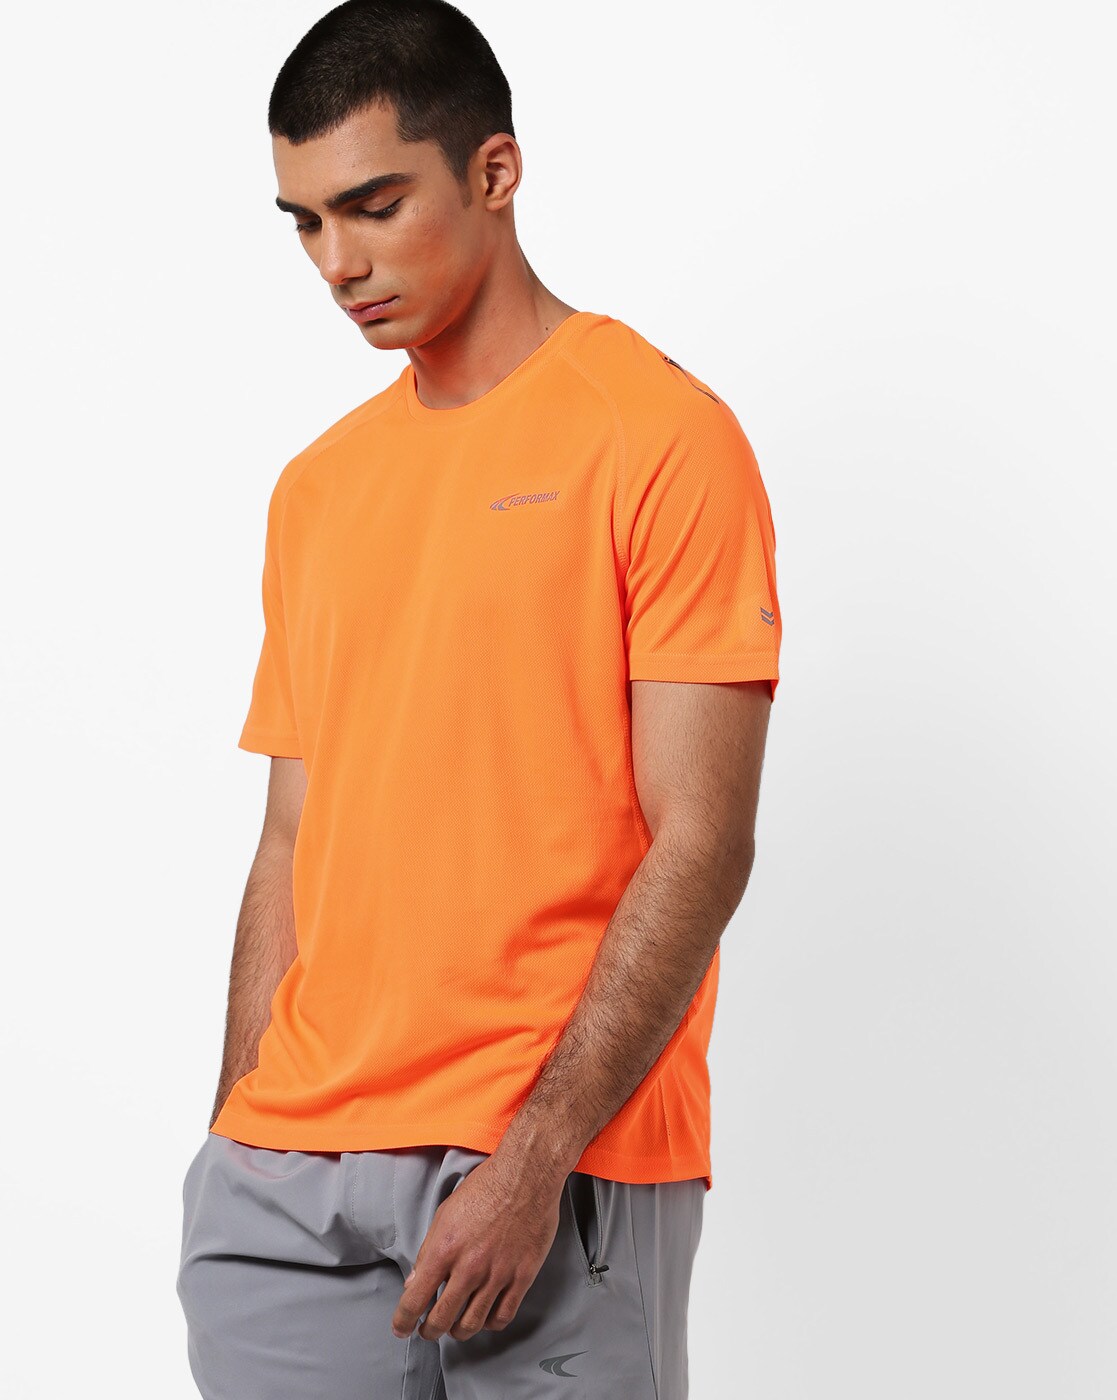 performax t shirts online india